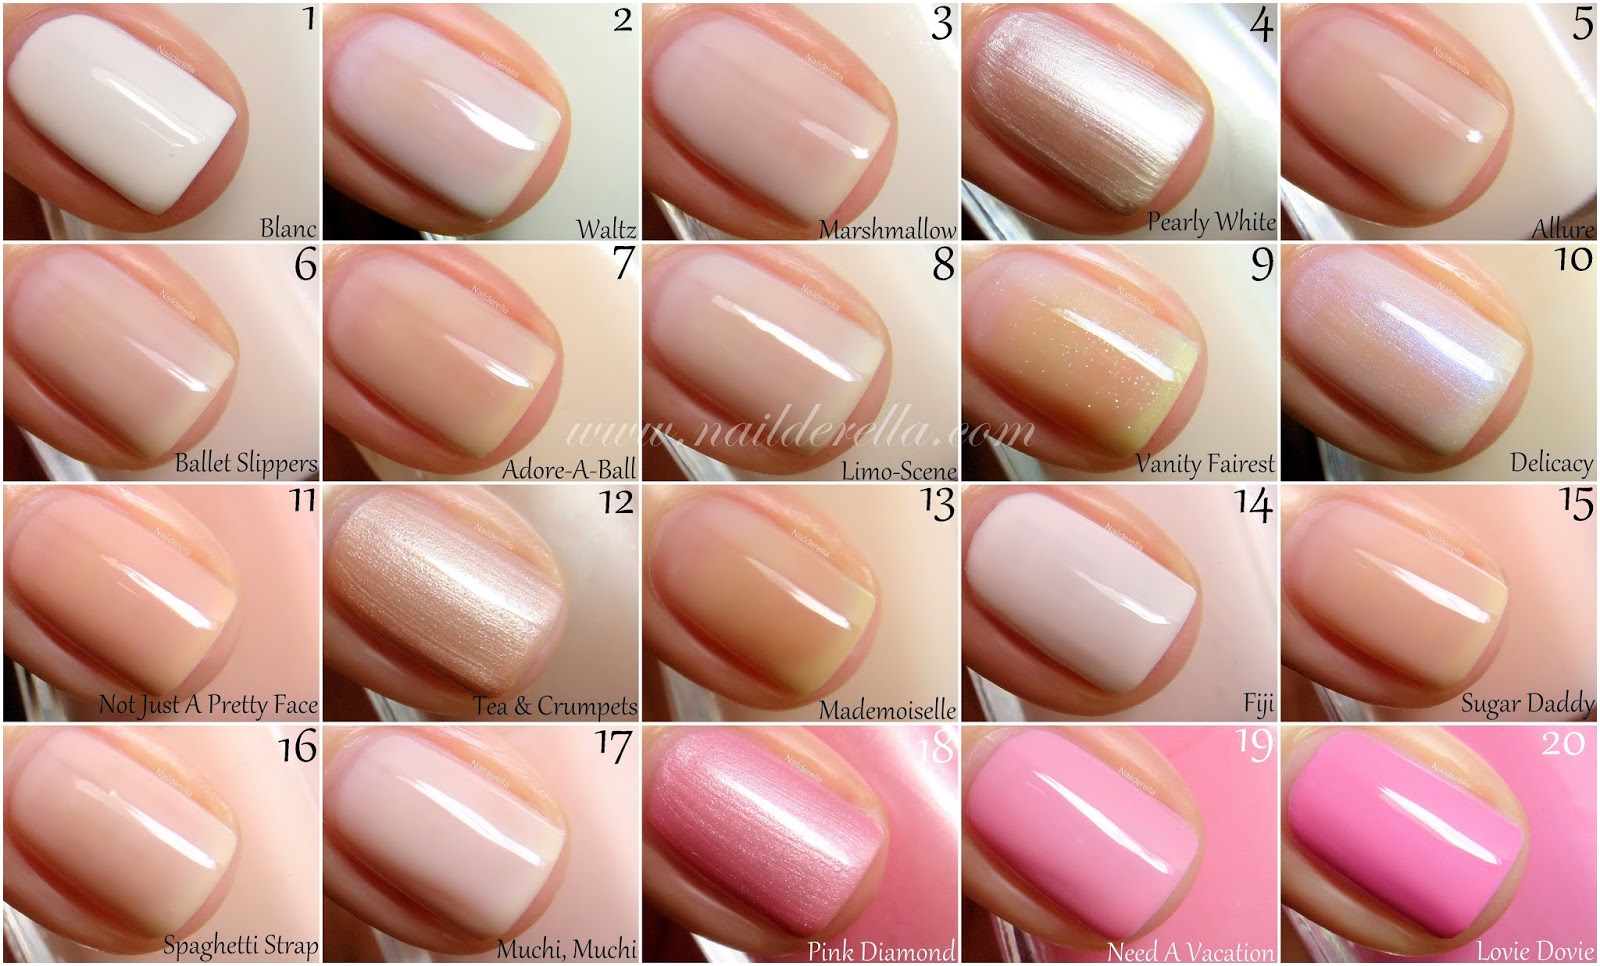 3. "Blushing Pink" nail polish for a sweet and feminine anniversary look - wide 5